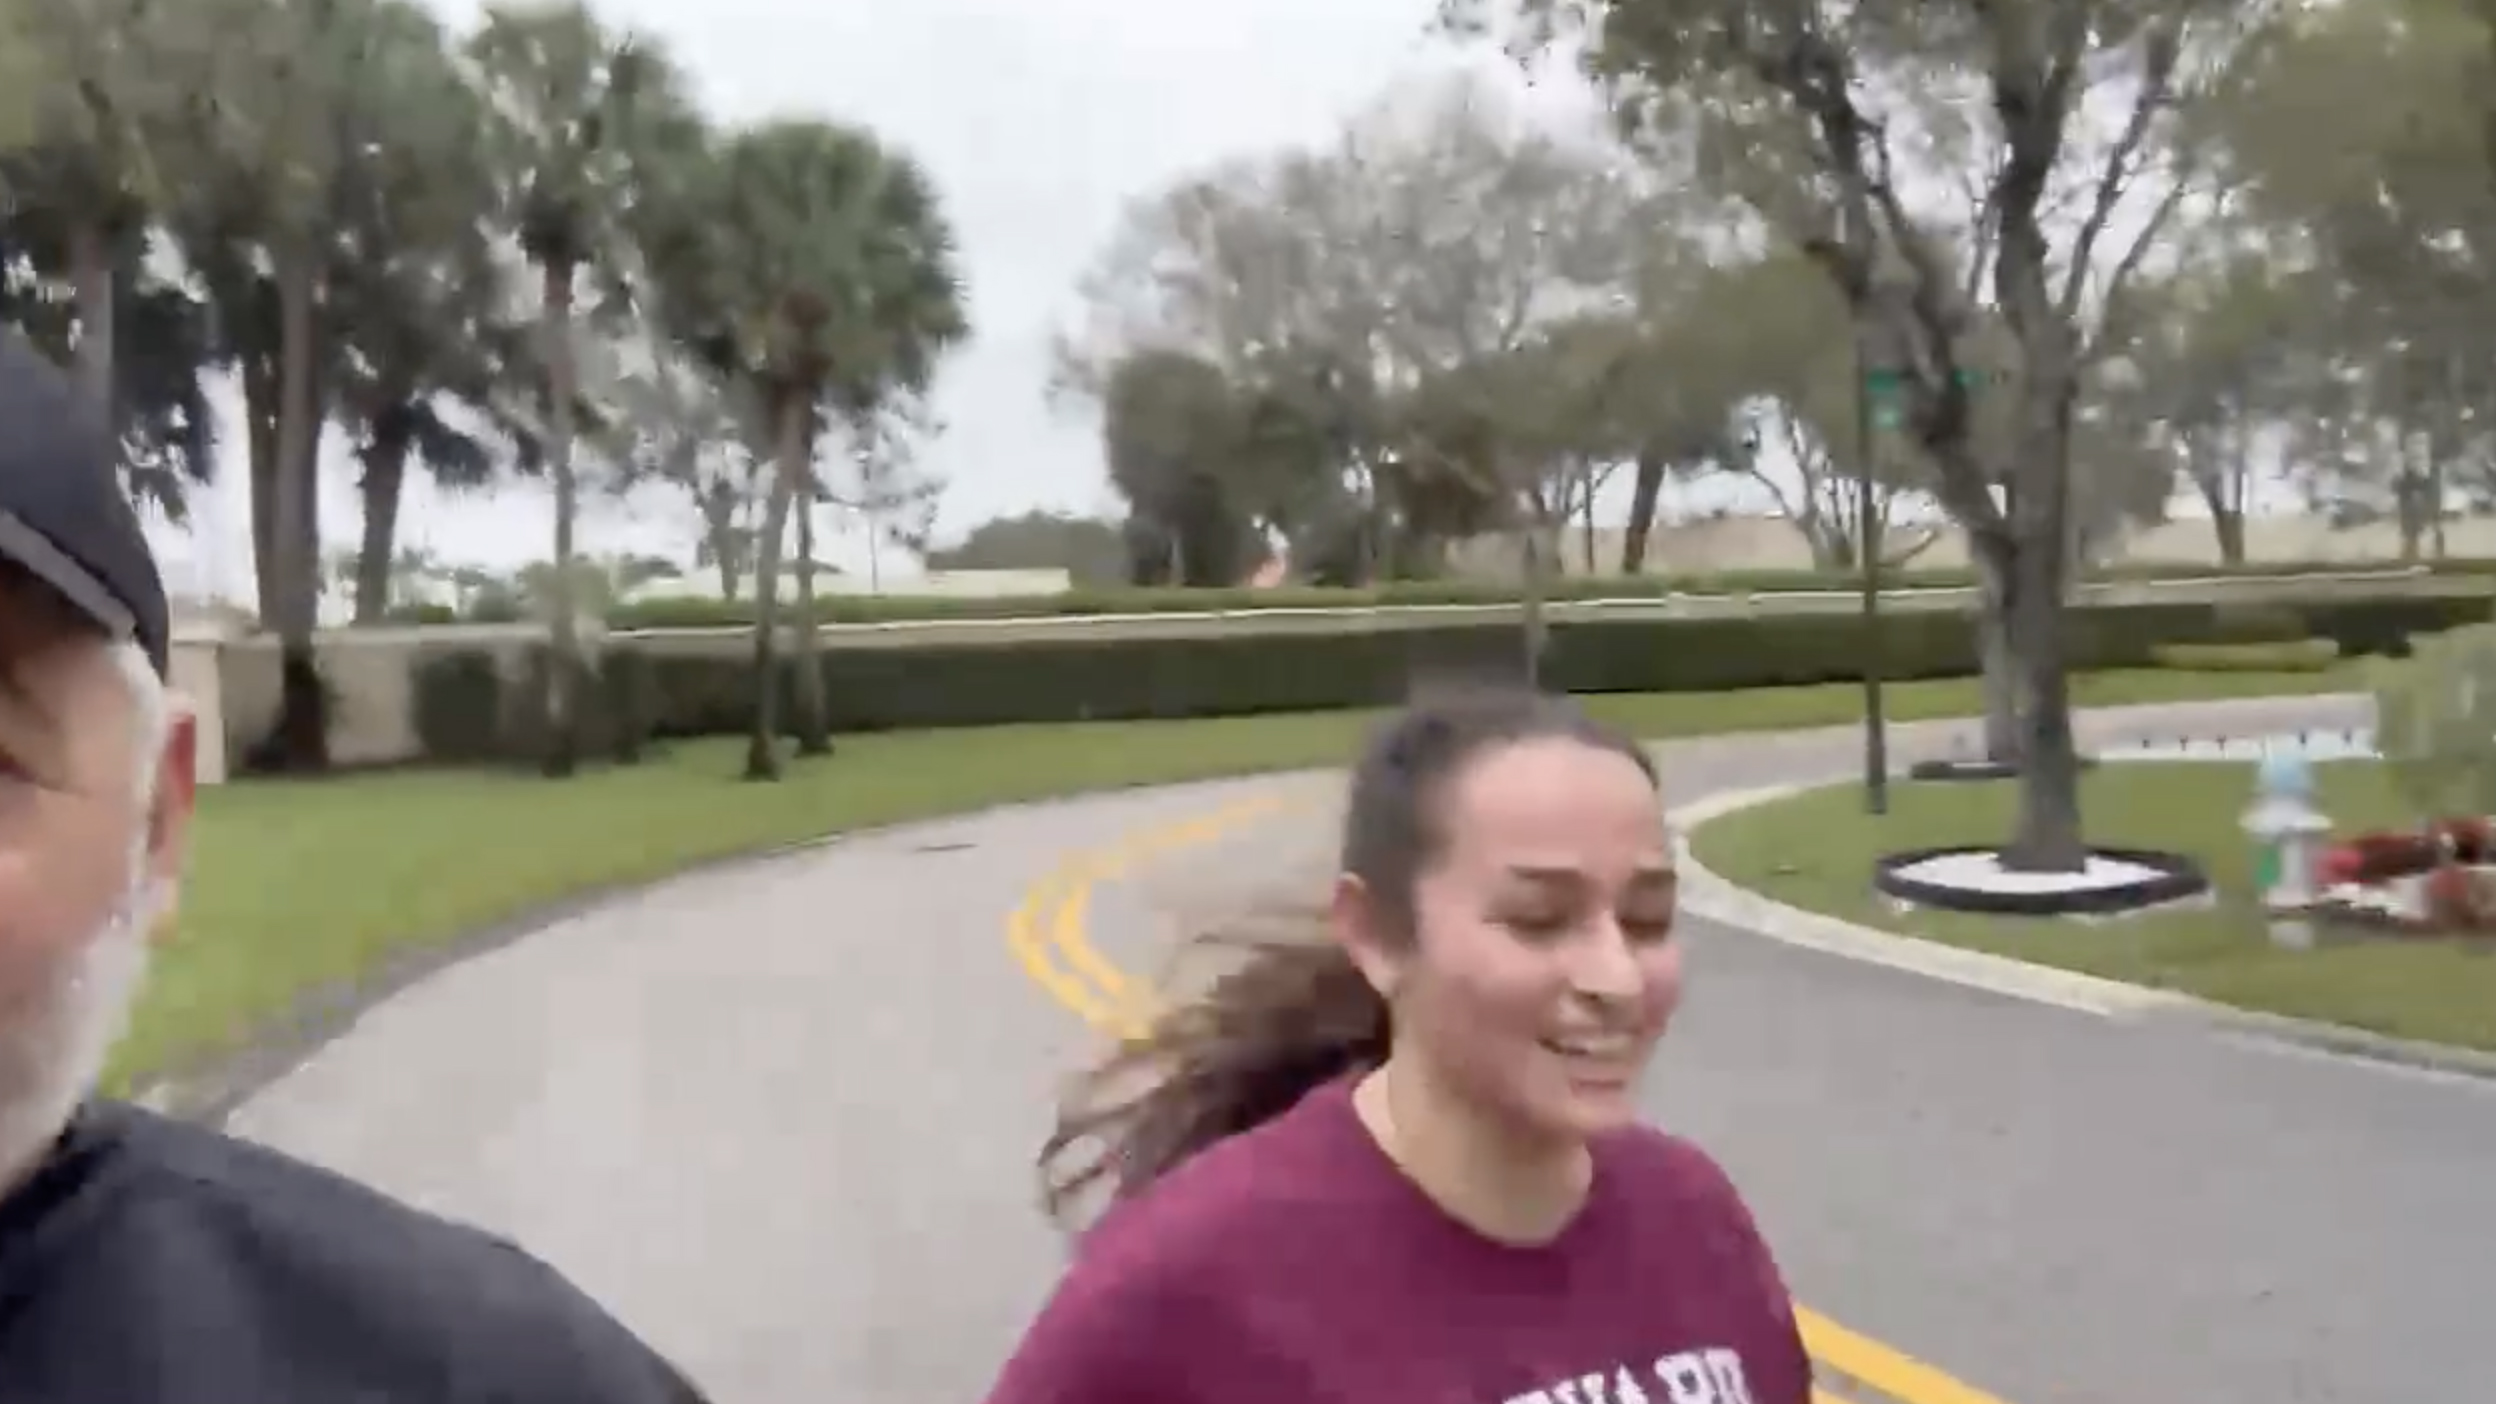 The TLC star kicked off her new year running with her dad